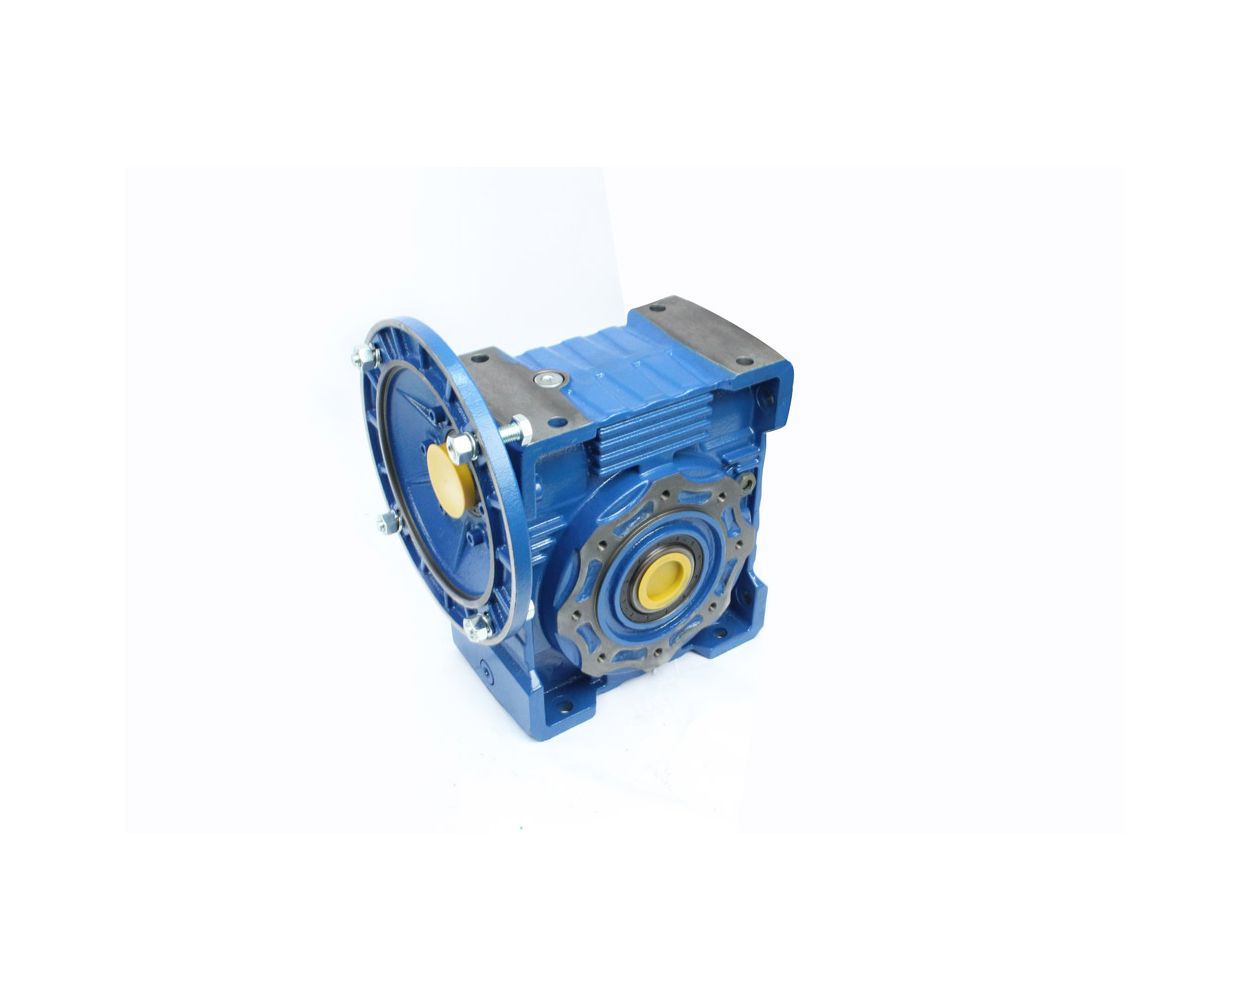 Worm gear unit size 110 ratio 30:1 with 100/112B5 flange